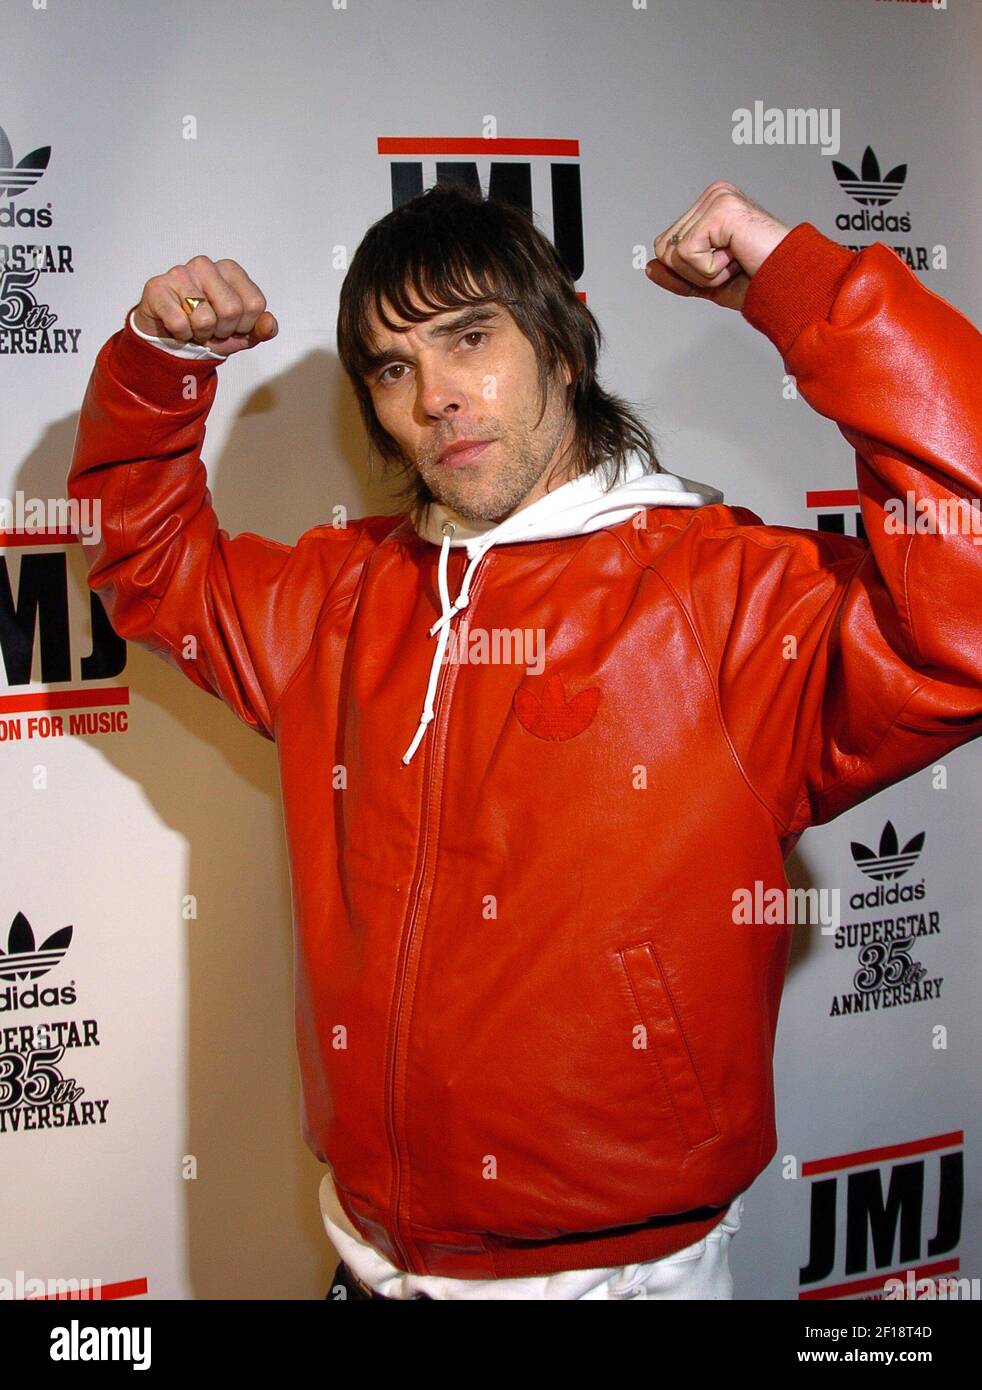 KRT STAND ALONE ENTERTAINMENT PHOTO SLUGGED: ADIDAS KRT PHOTOGRAPH BY  SLAVEN VLASIC/ABACA PRESS (February 26) Ian Brown of "Stone Roses" arrives  at 35th Anniversary gala benefit celebrating the iconic Adidas Superstar  sneaker